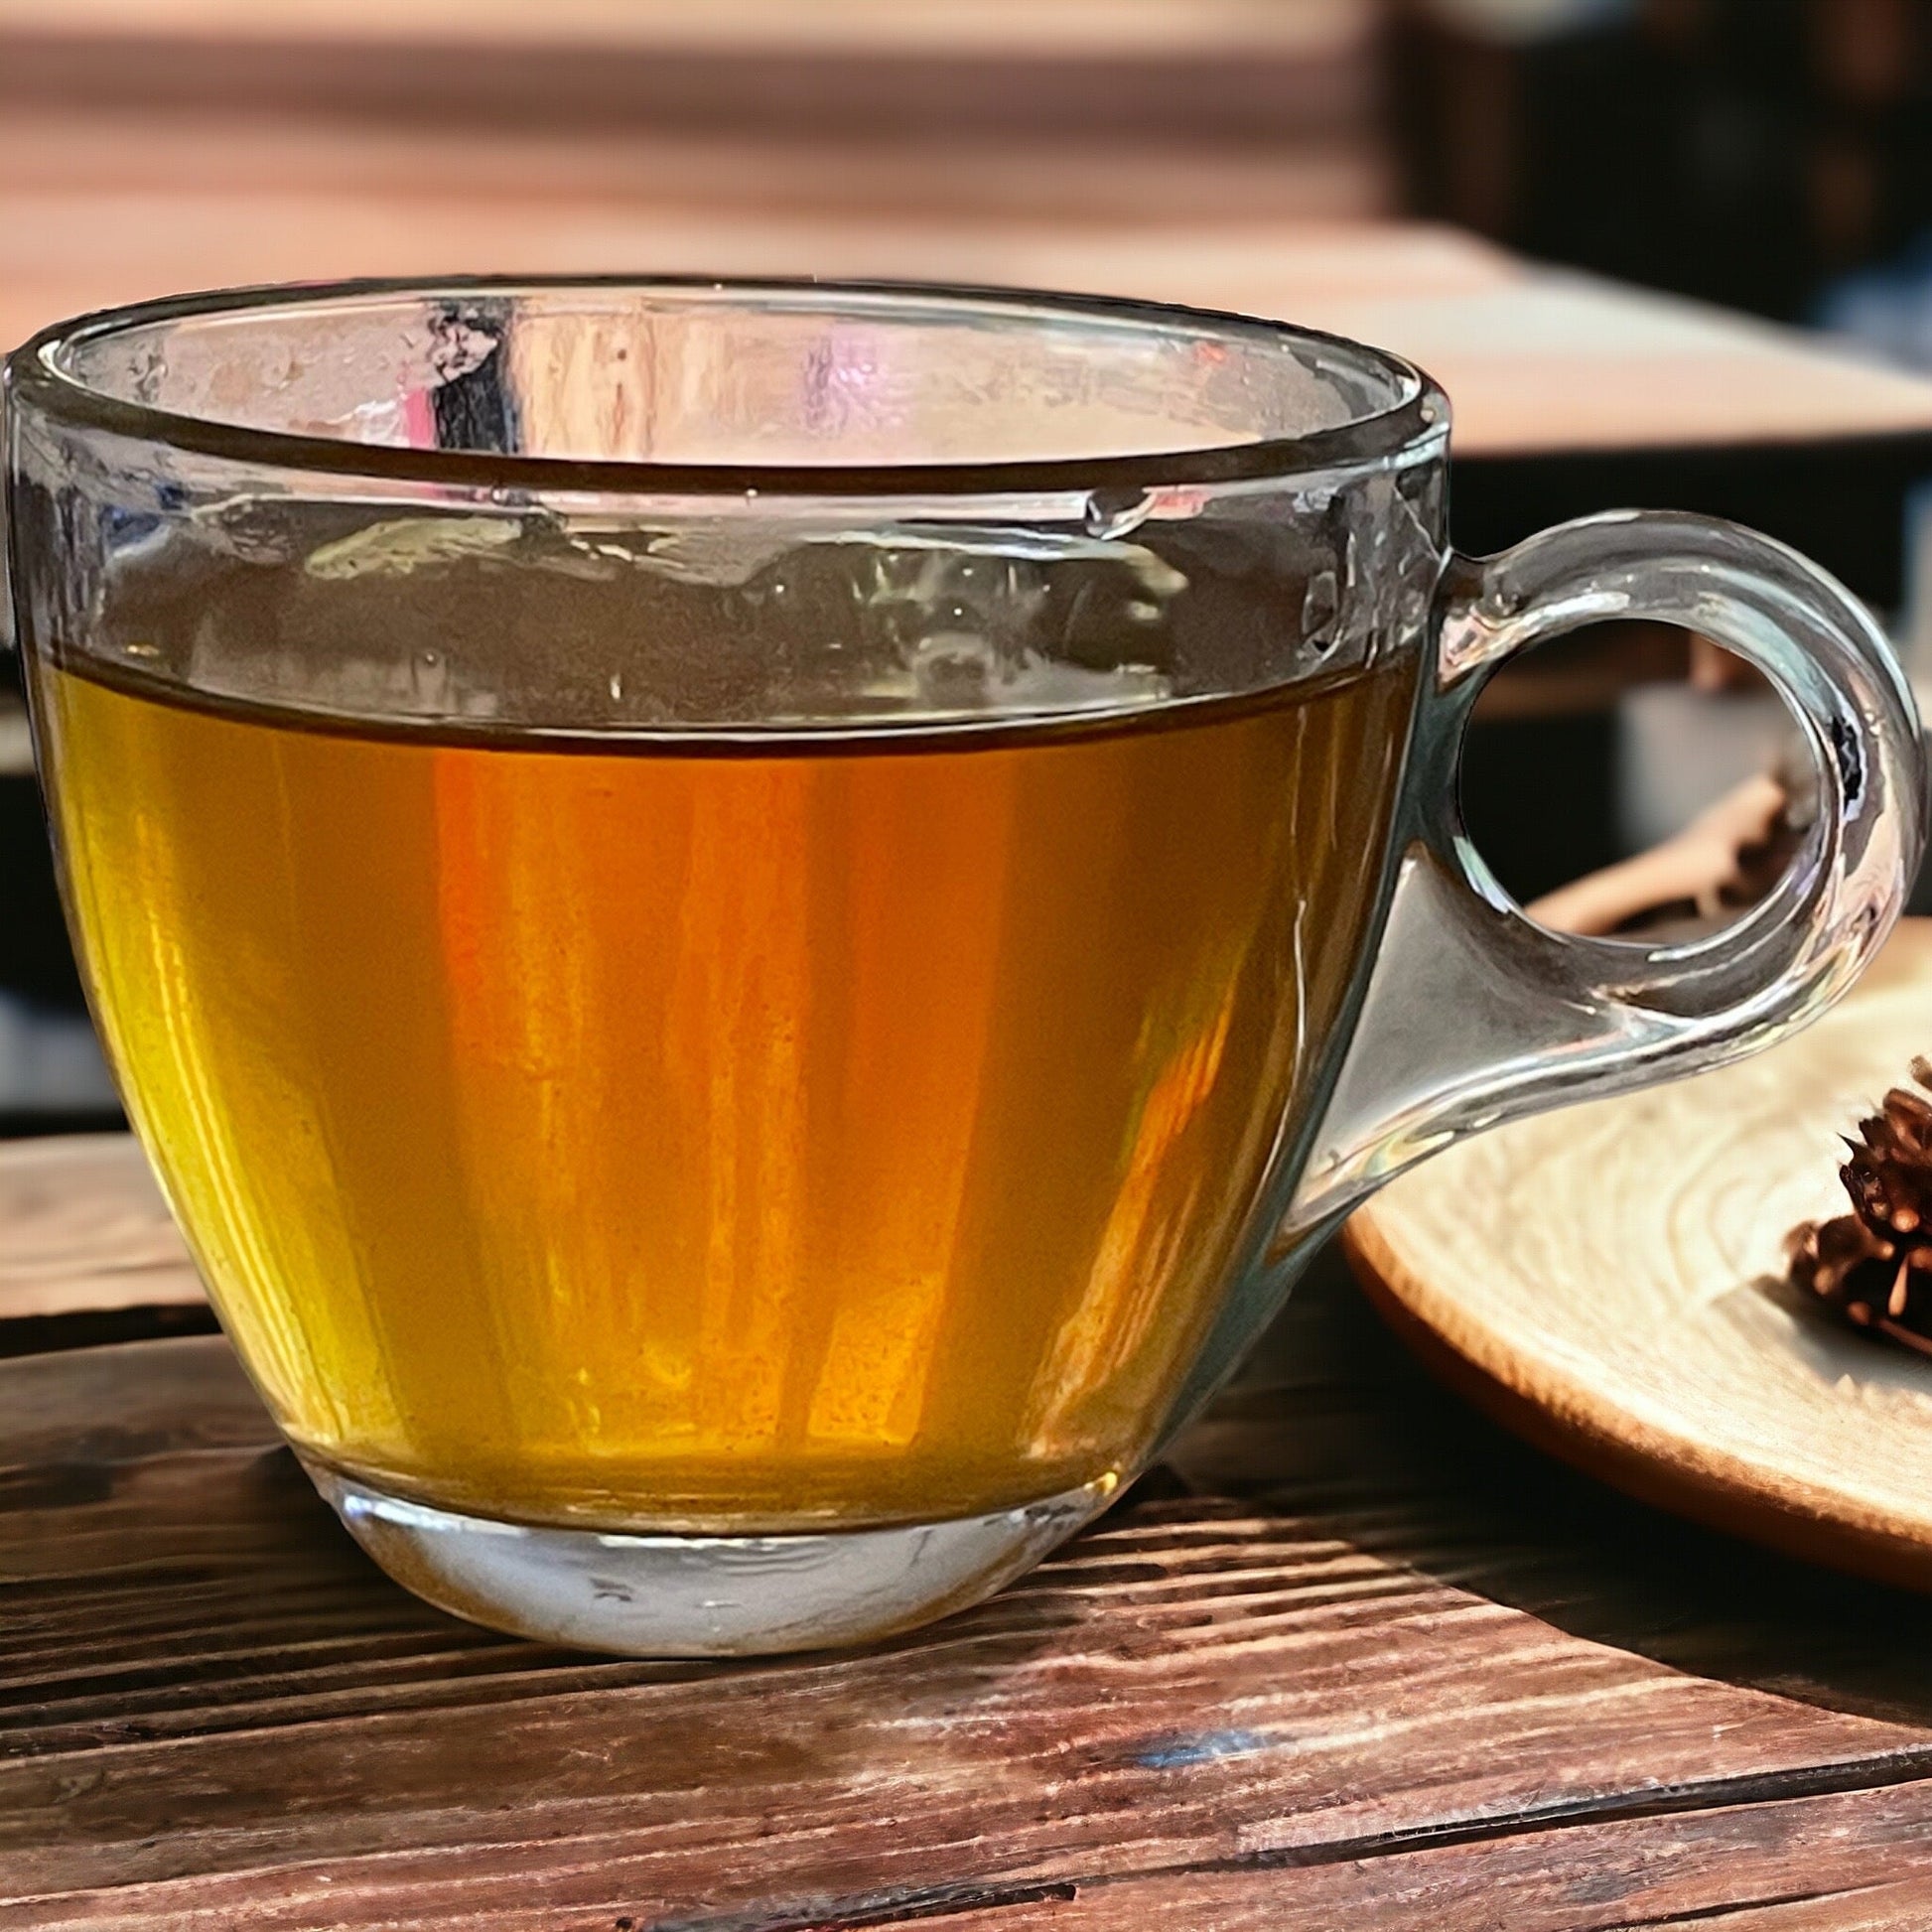 Jaroma freshly brewed colon cleanse tea in a glass cup standing on the rustic wooden table